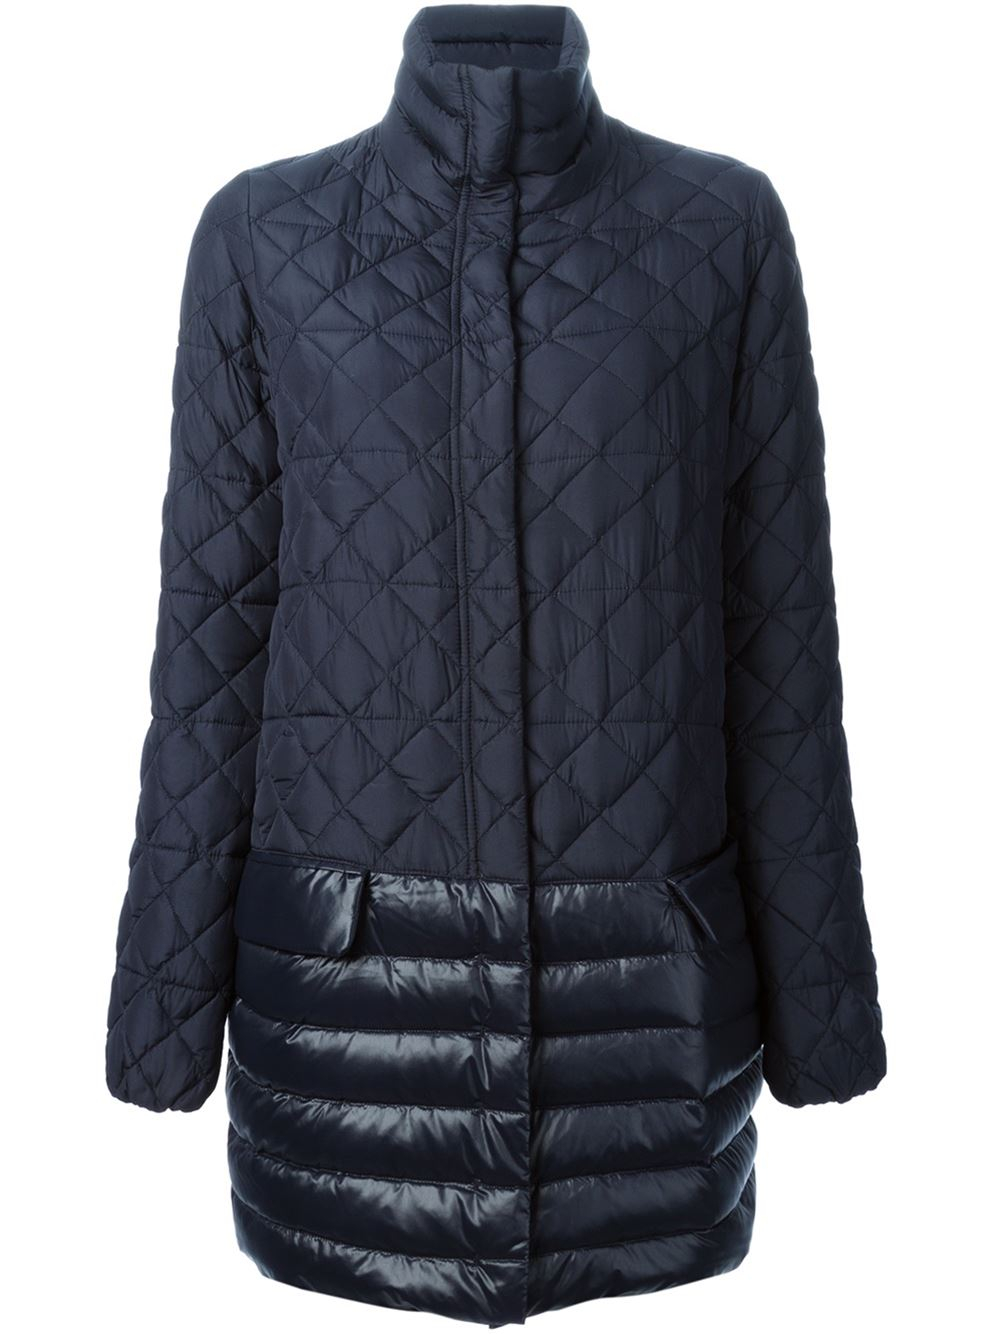 Lyst - Duvetica Euippe Panelled Padded Coat in Blue